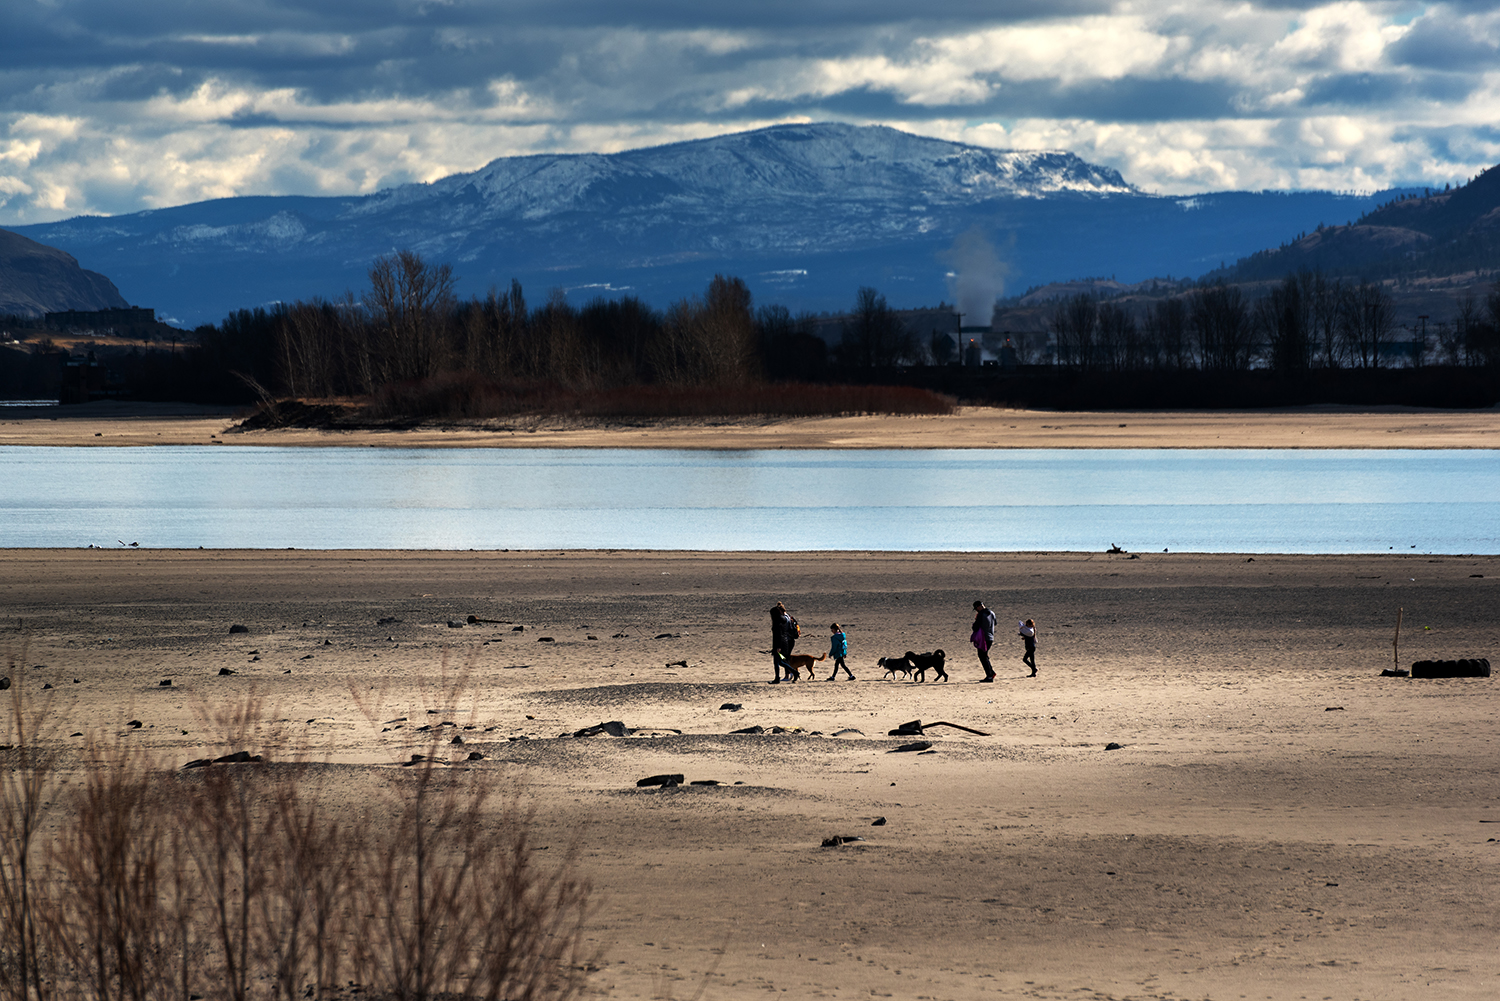 Kamloops Other people walking through the beach with a long lake